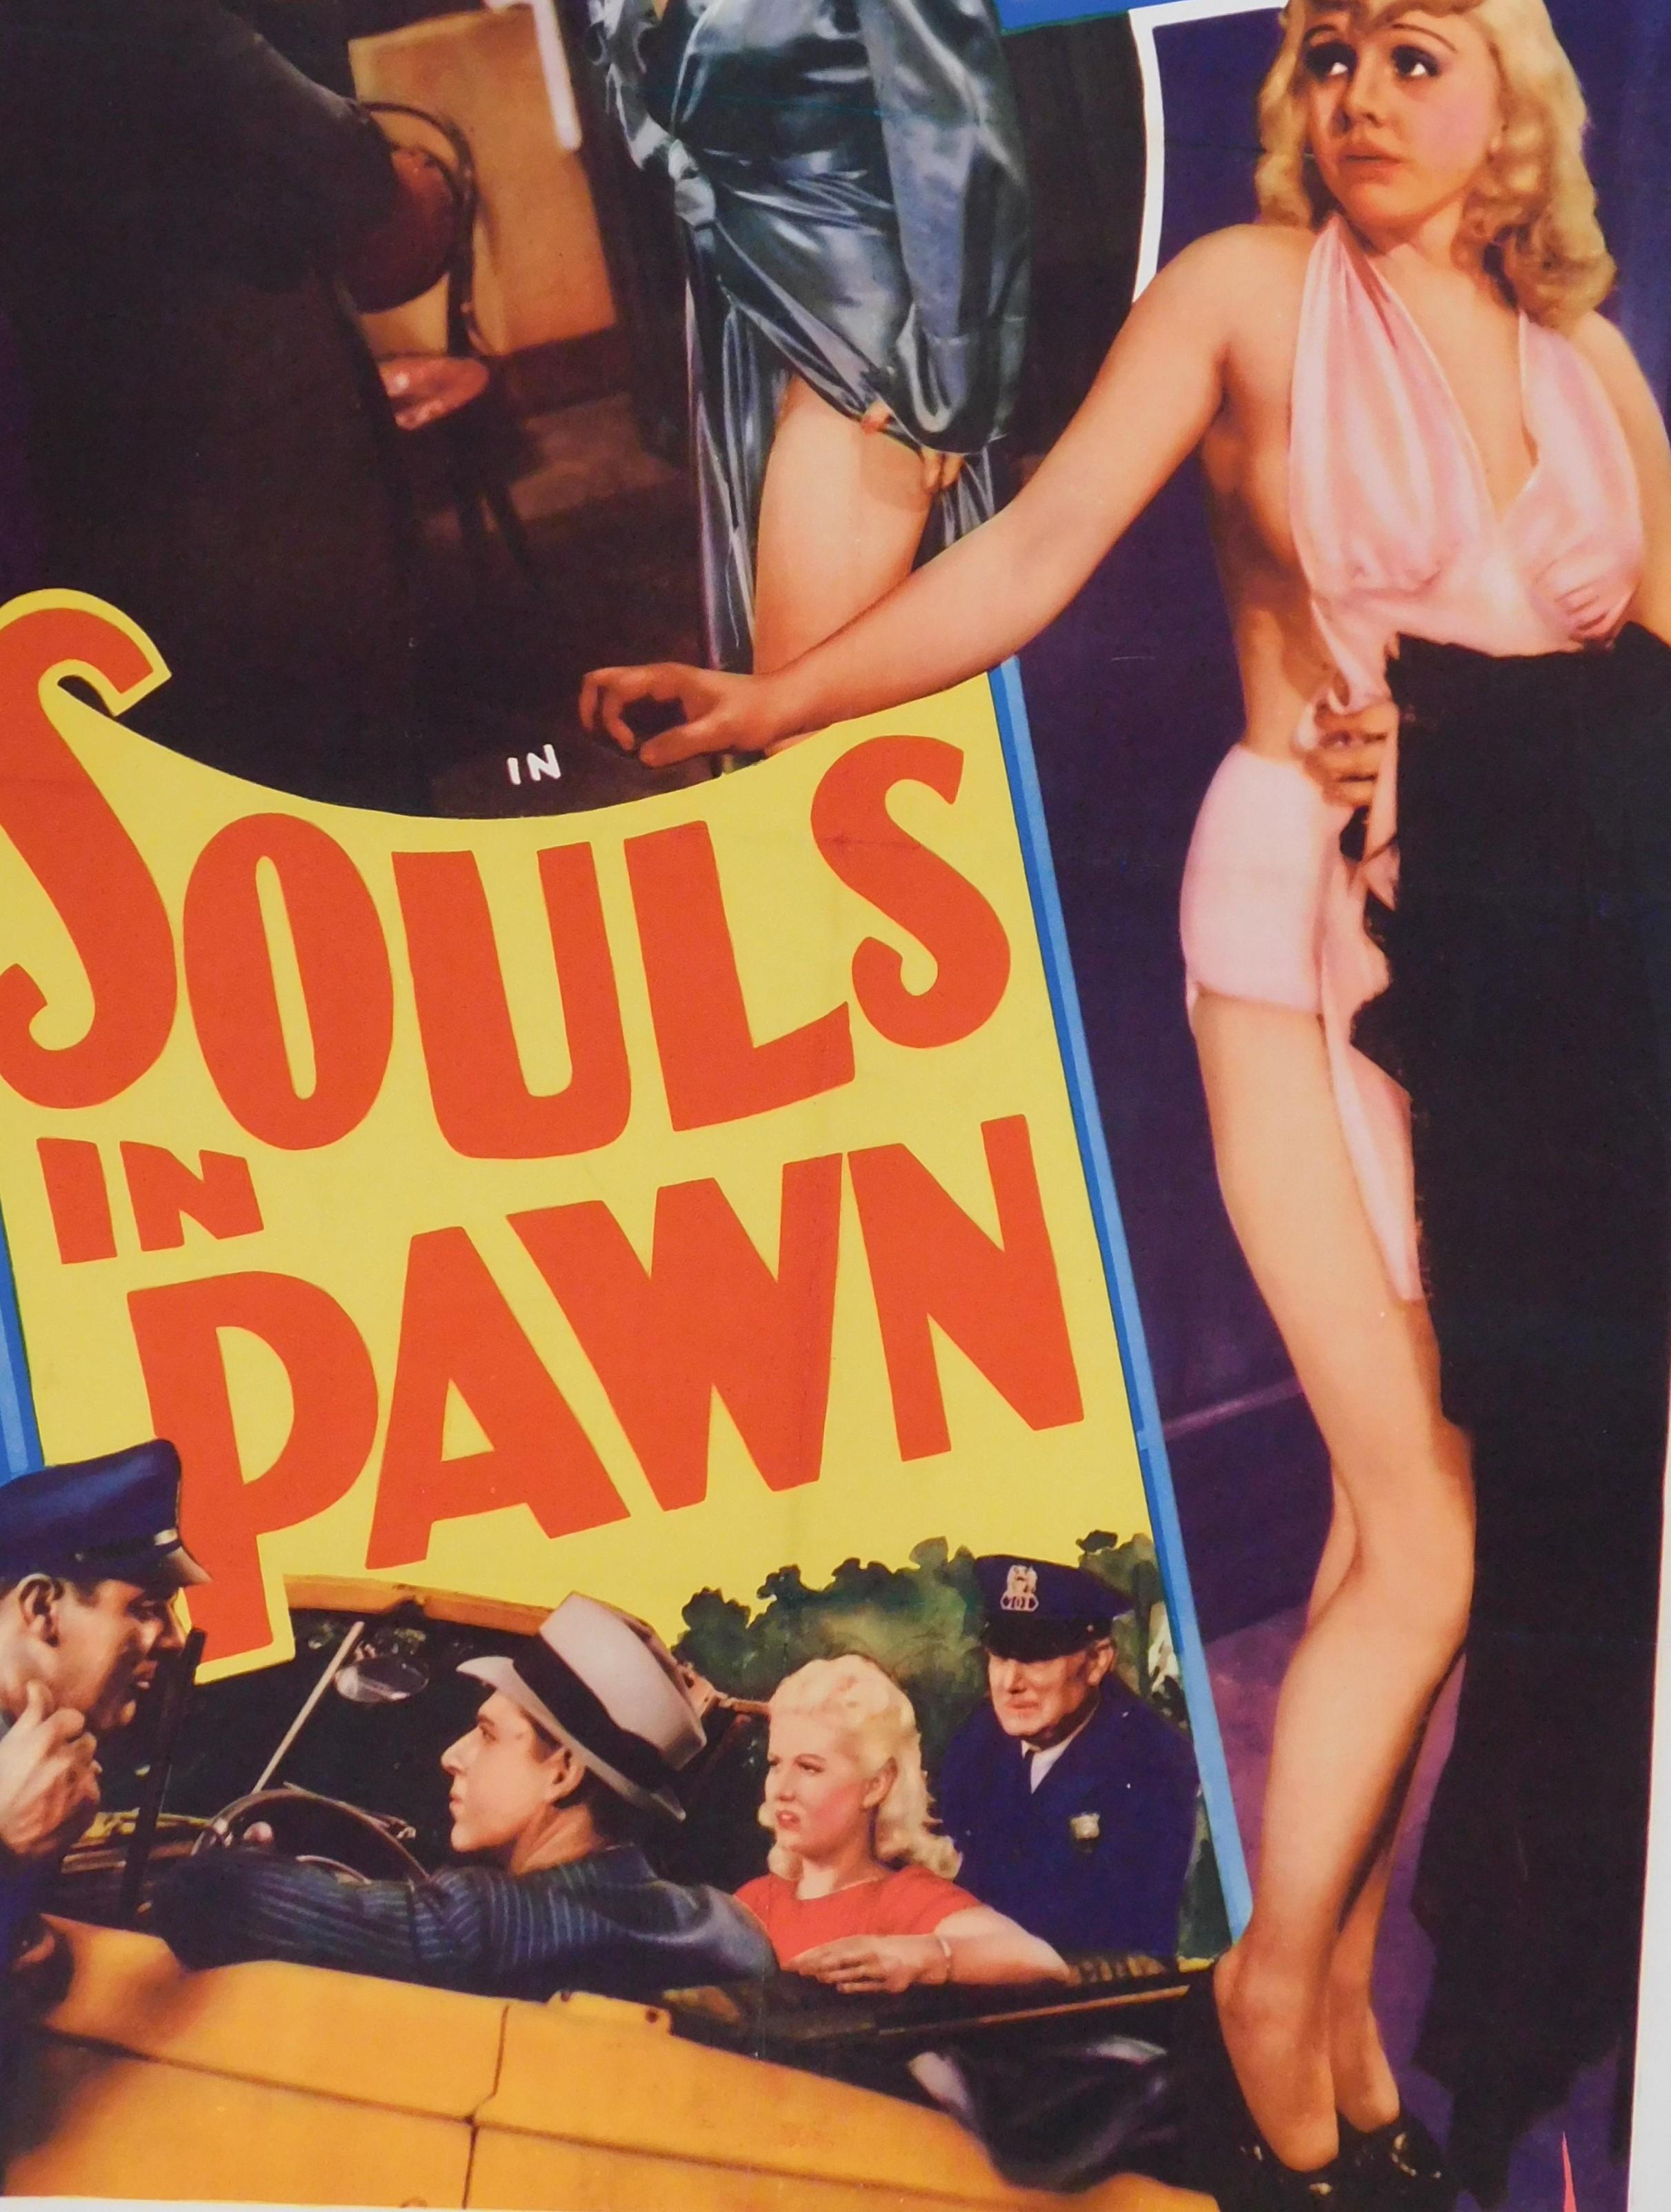 Souls in Pawn 1940 Original Linen Backed Theatrical Poster Burlesque One-Sheet In Good Condition For Sale In Hamilton, Ontario